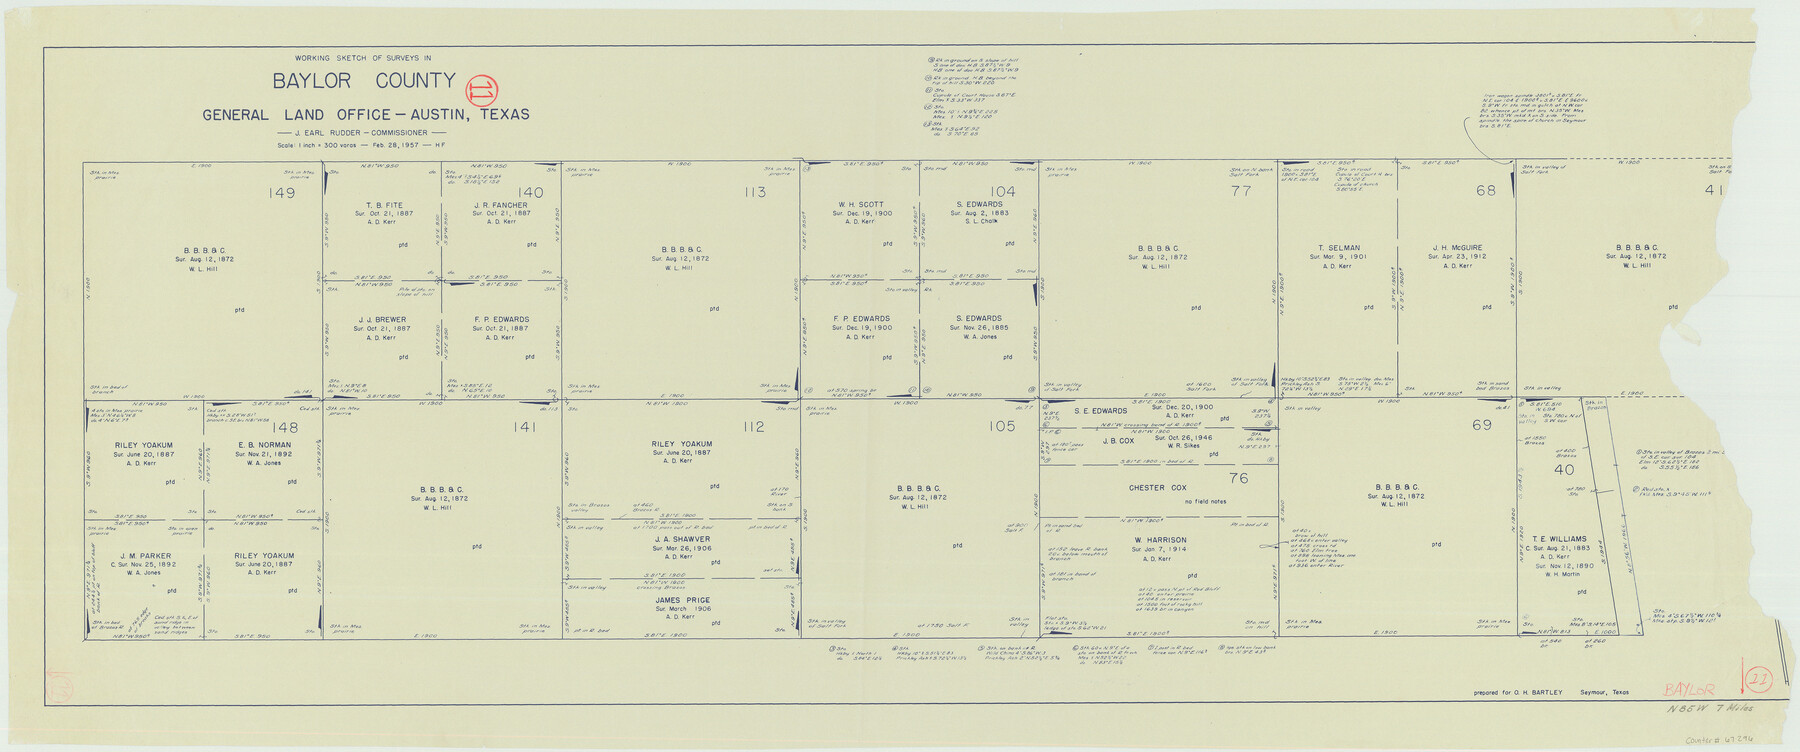 67296, Baylor County Working Sketch 11, General Map Collection